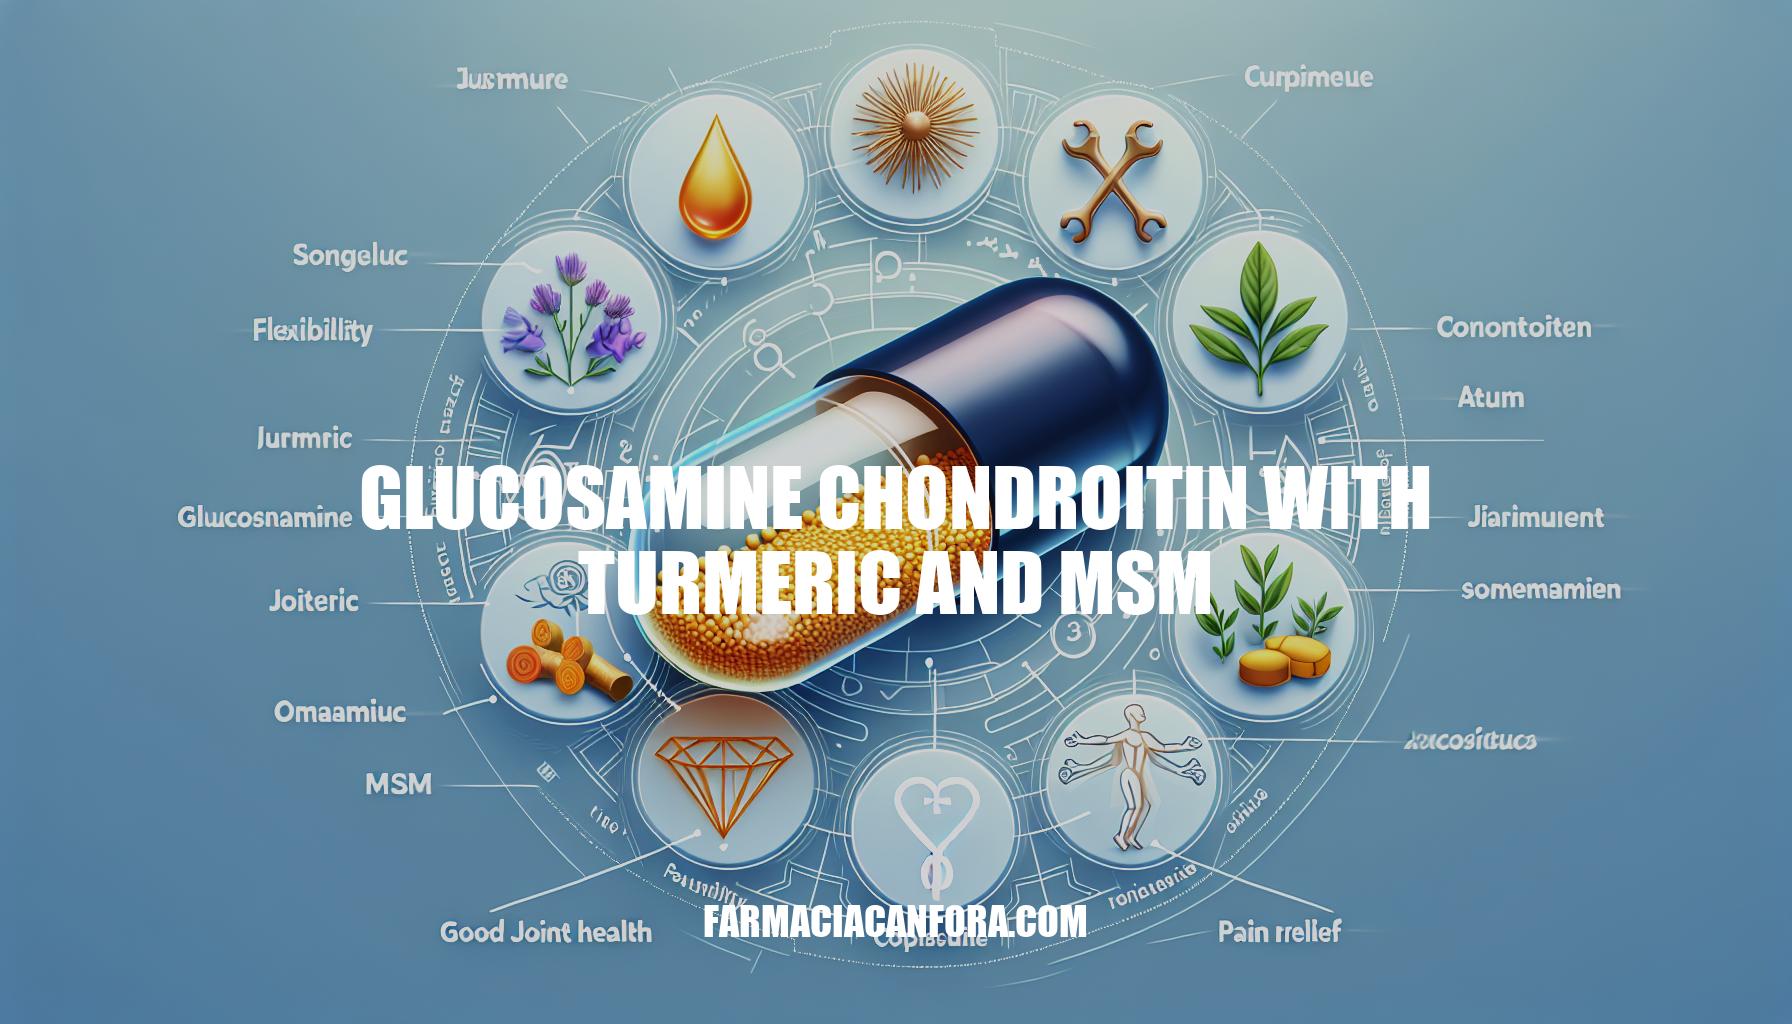 Benefits of Glucosamine Chondroitin with Turmeric and MSM